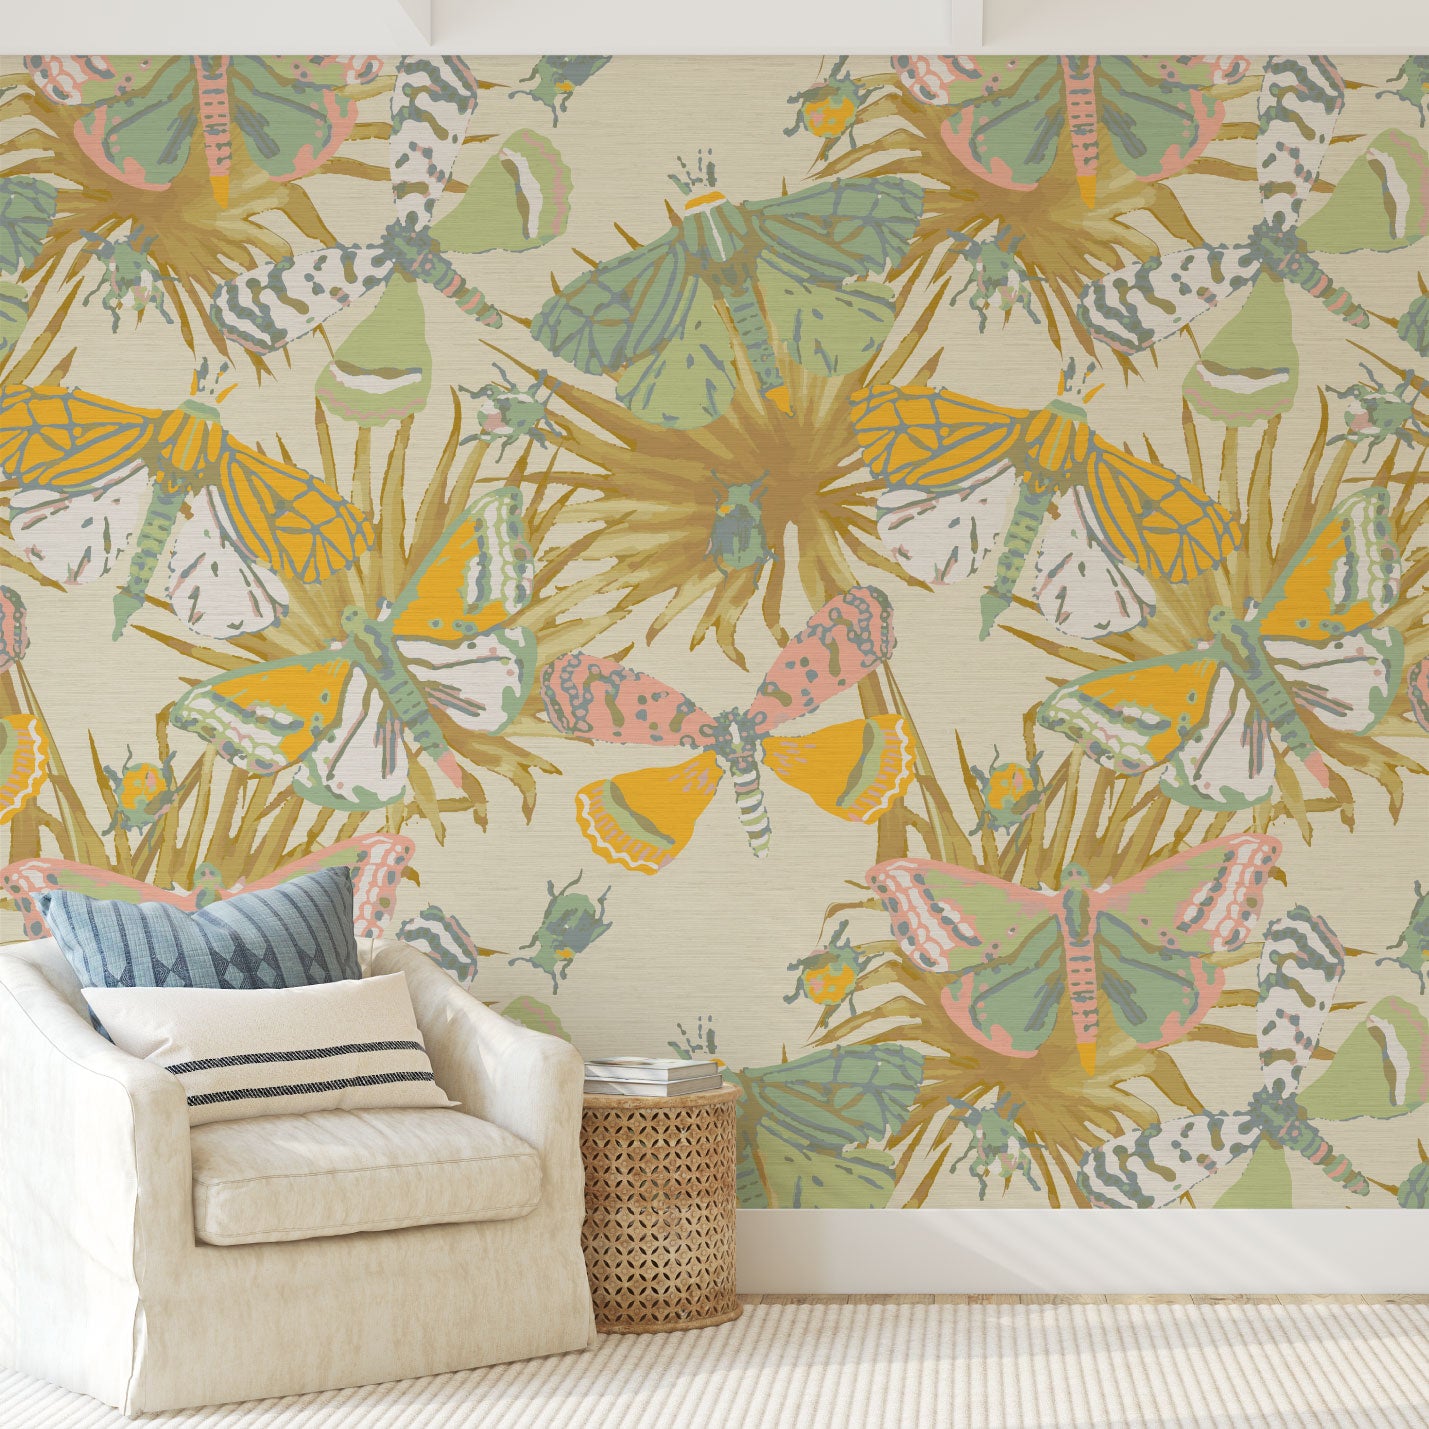 Grasscloth wallpaper Natural Textured Eco-Friendly Non-toxic High-quality  Sustainable Interior Design Bold Custom Tailor-made Retro chic Bold tropical butterfly bug palm leaves animals botanical garden nature kids playroom bedroom nursery beige neutral cream